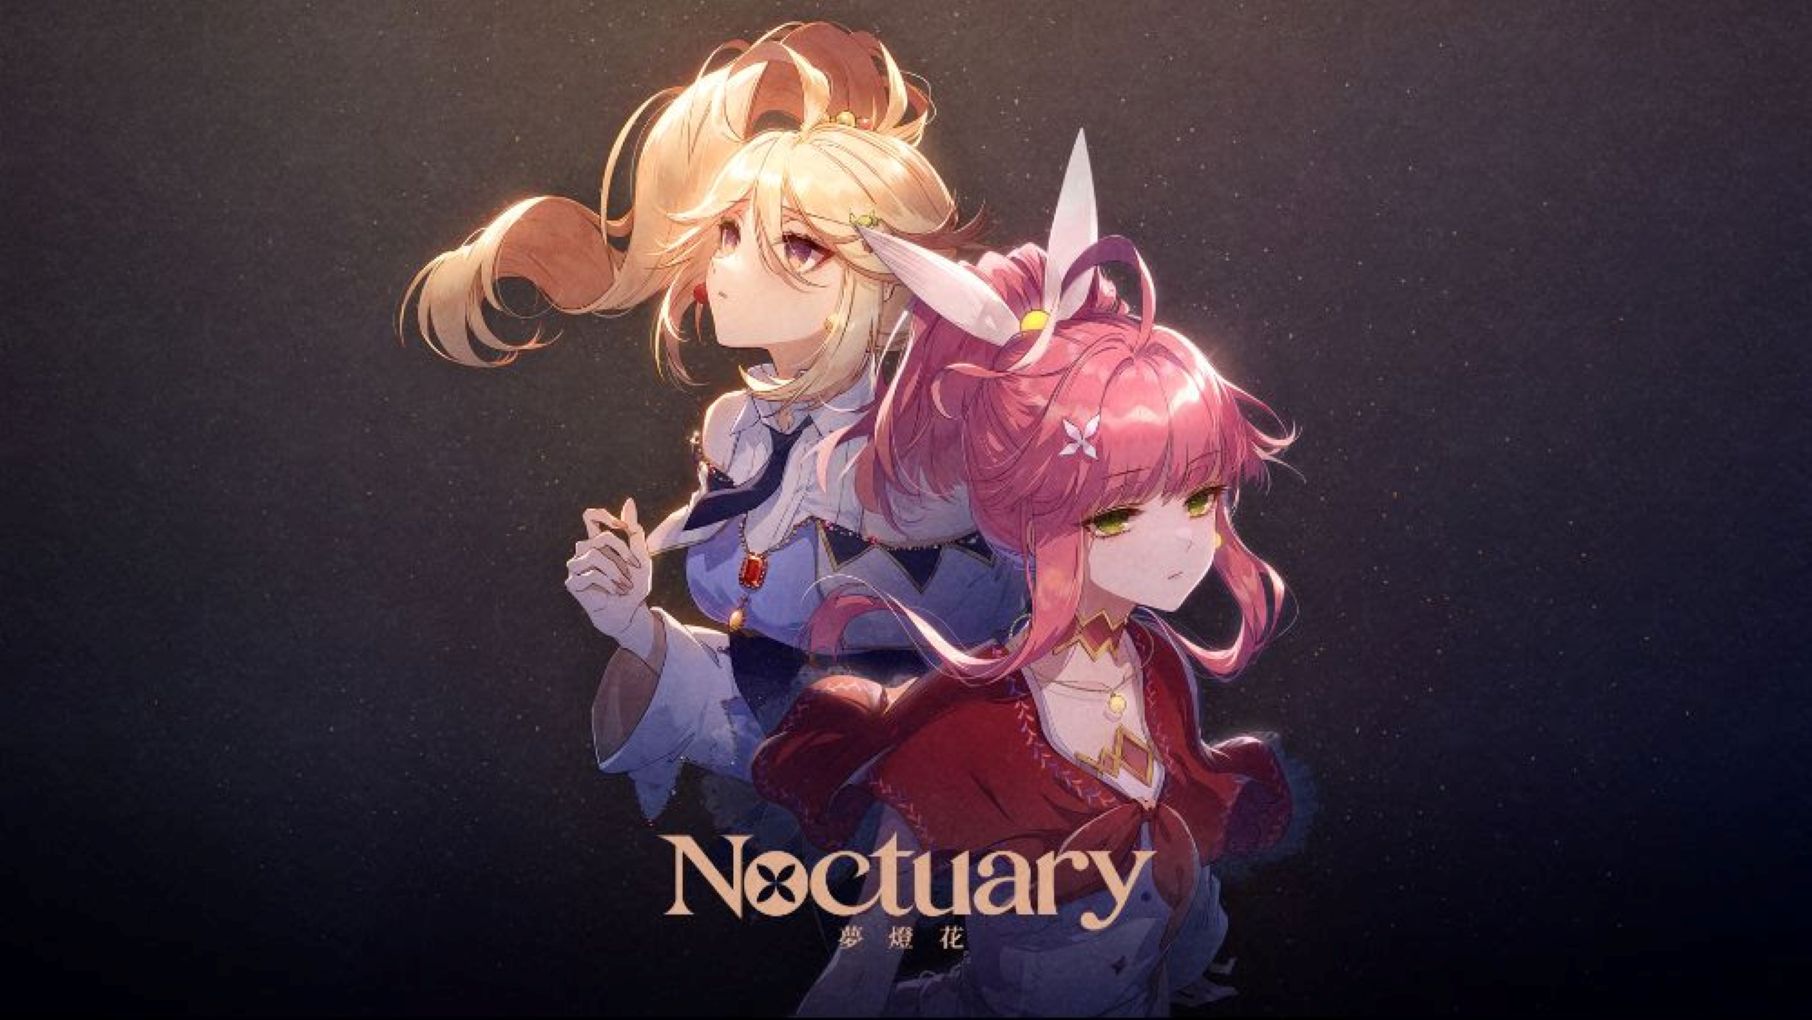 Experience Noctuary, an Enchanting Visual Novel and JRPG Out Now on PC